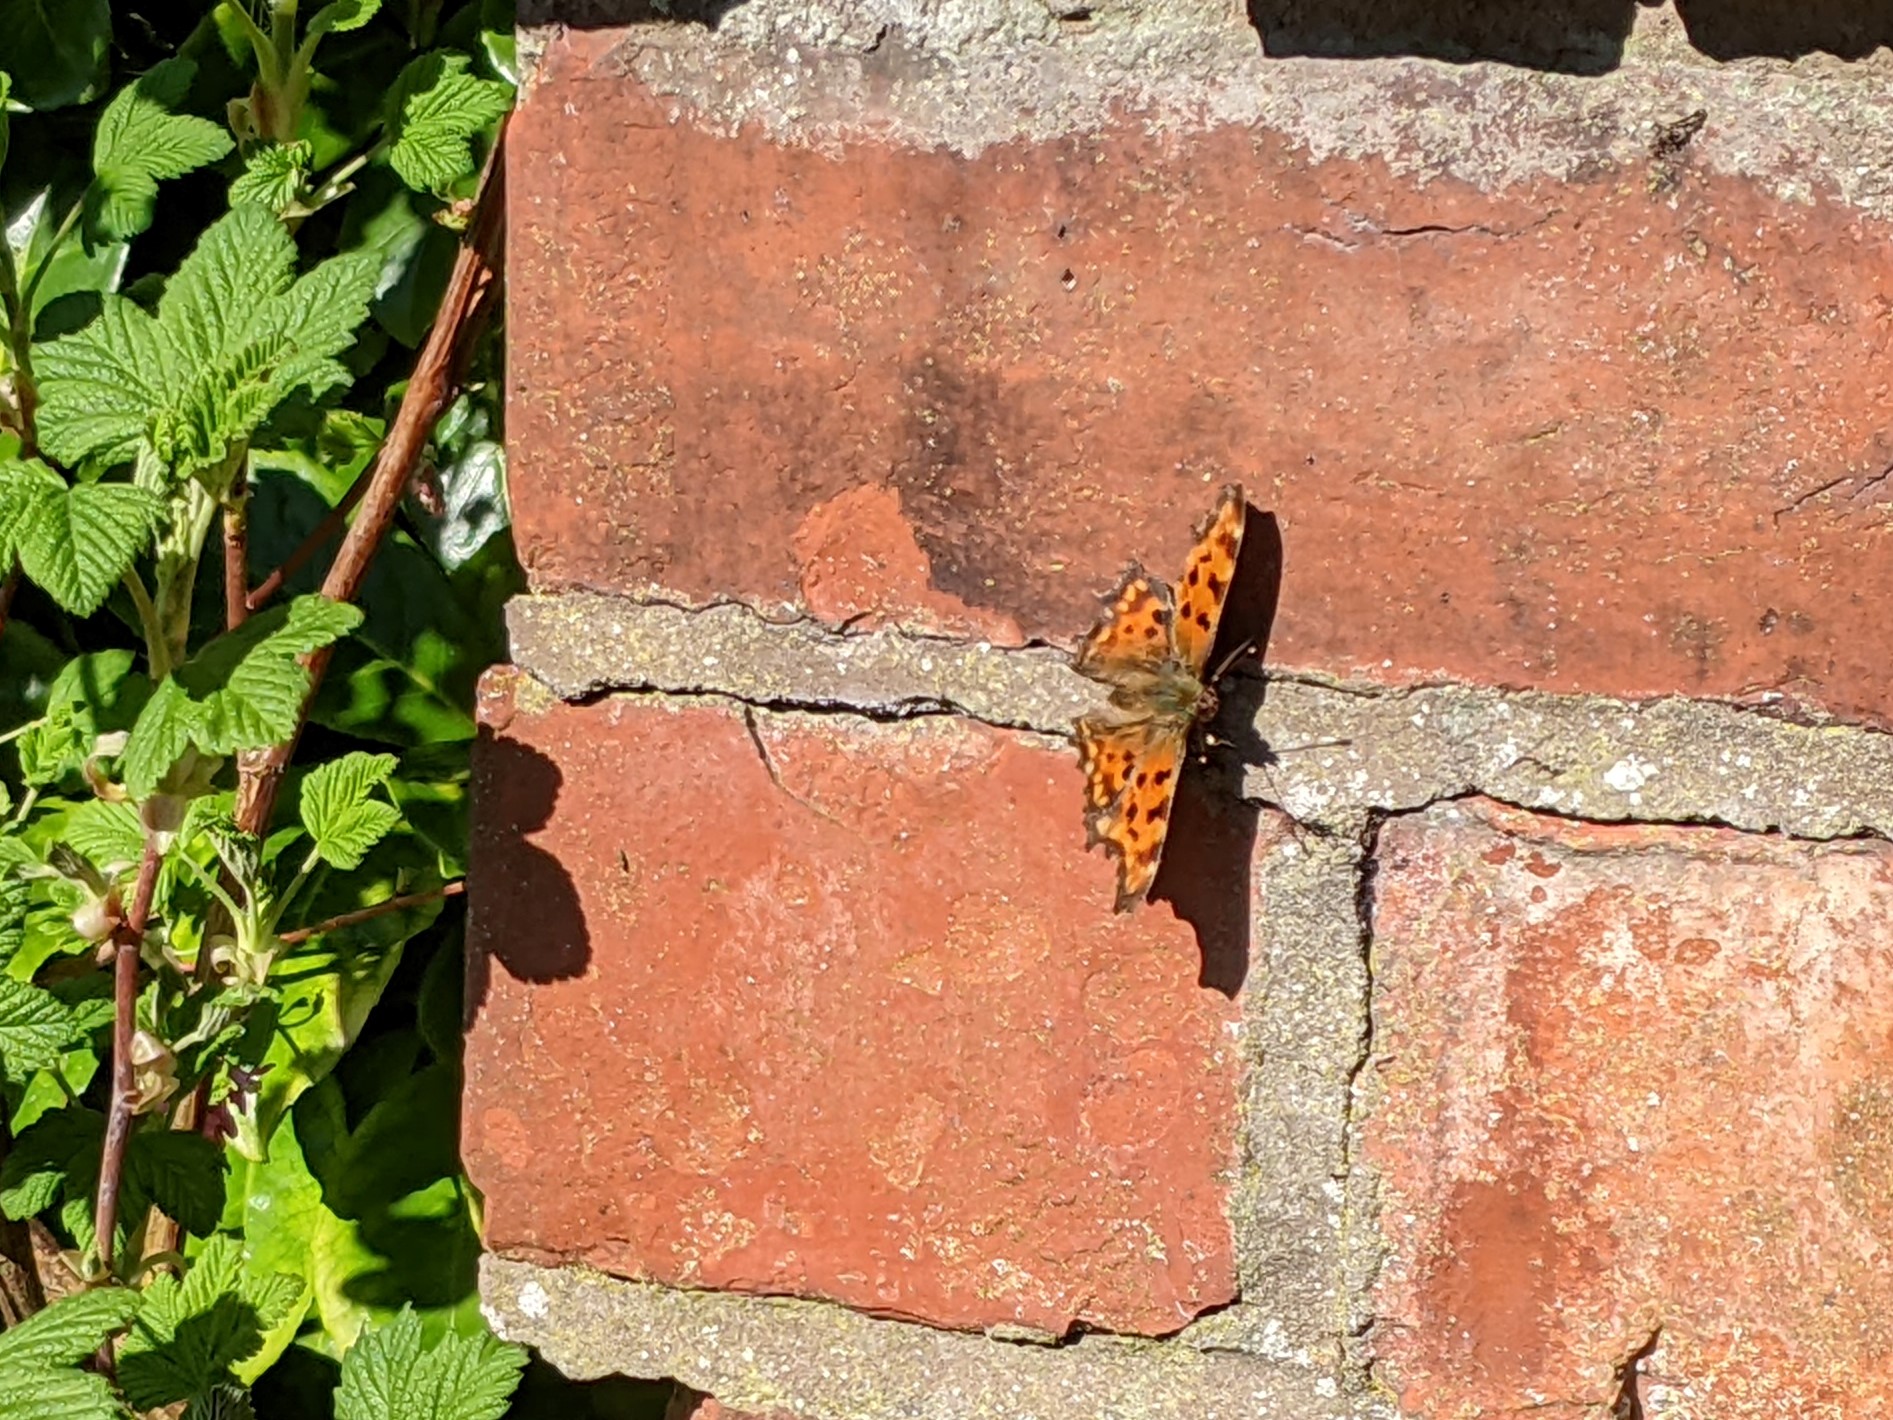 Comma butterfly, March 26th